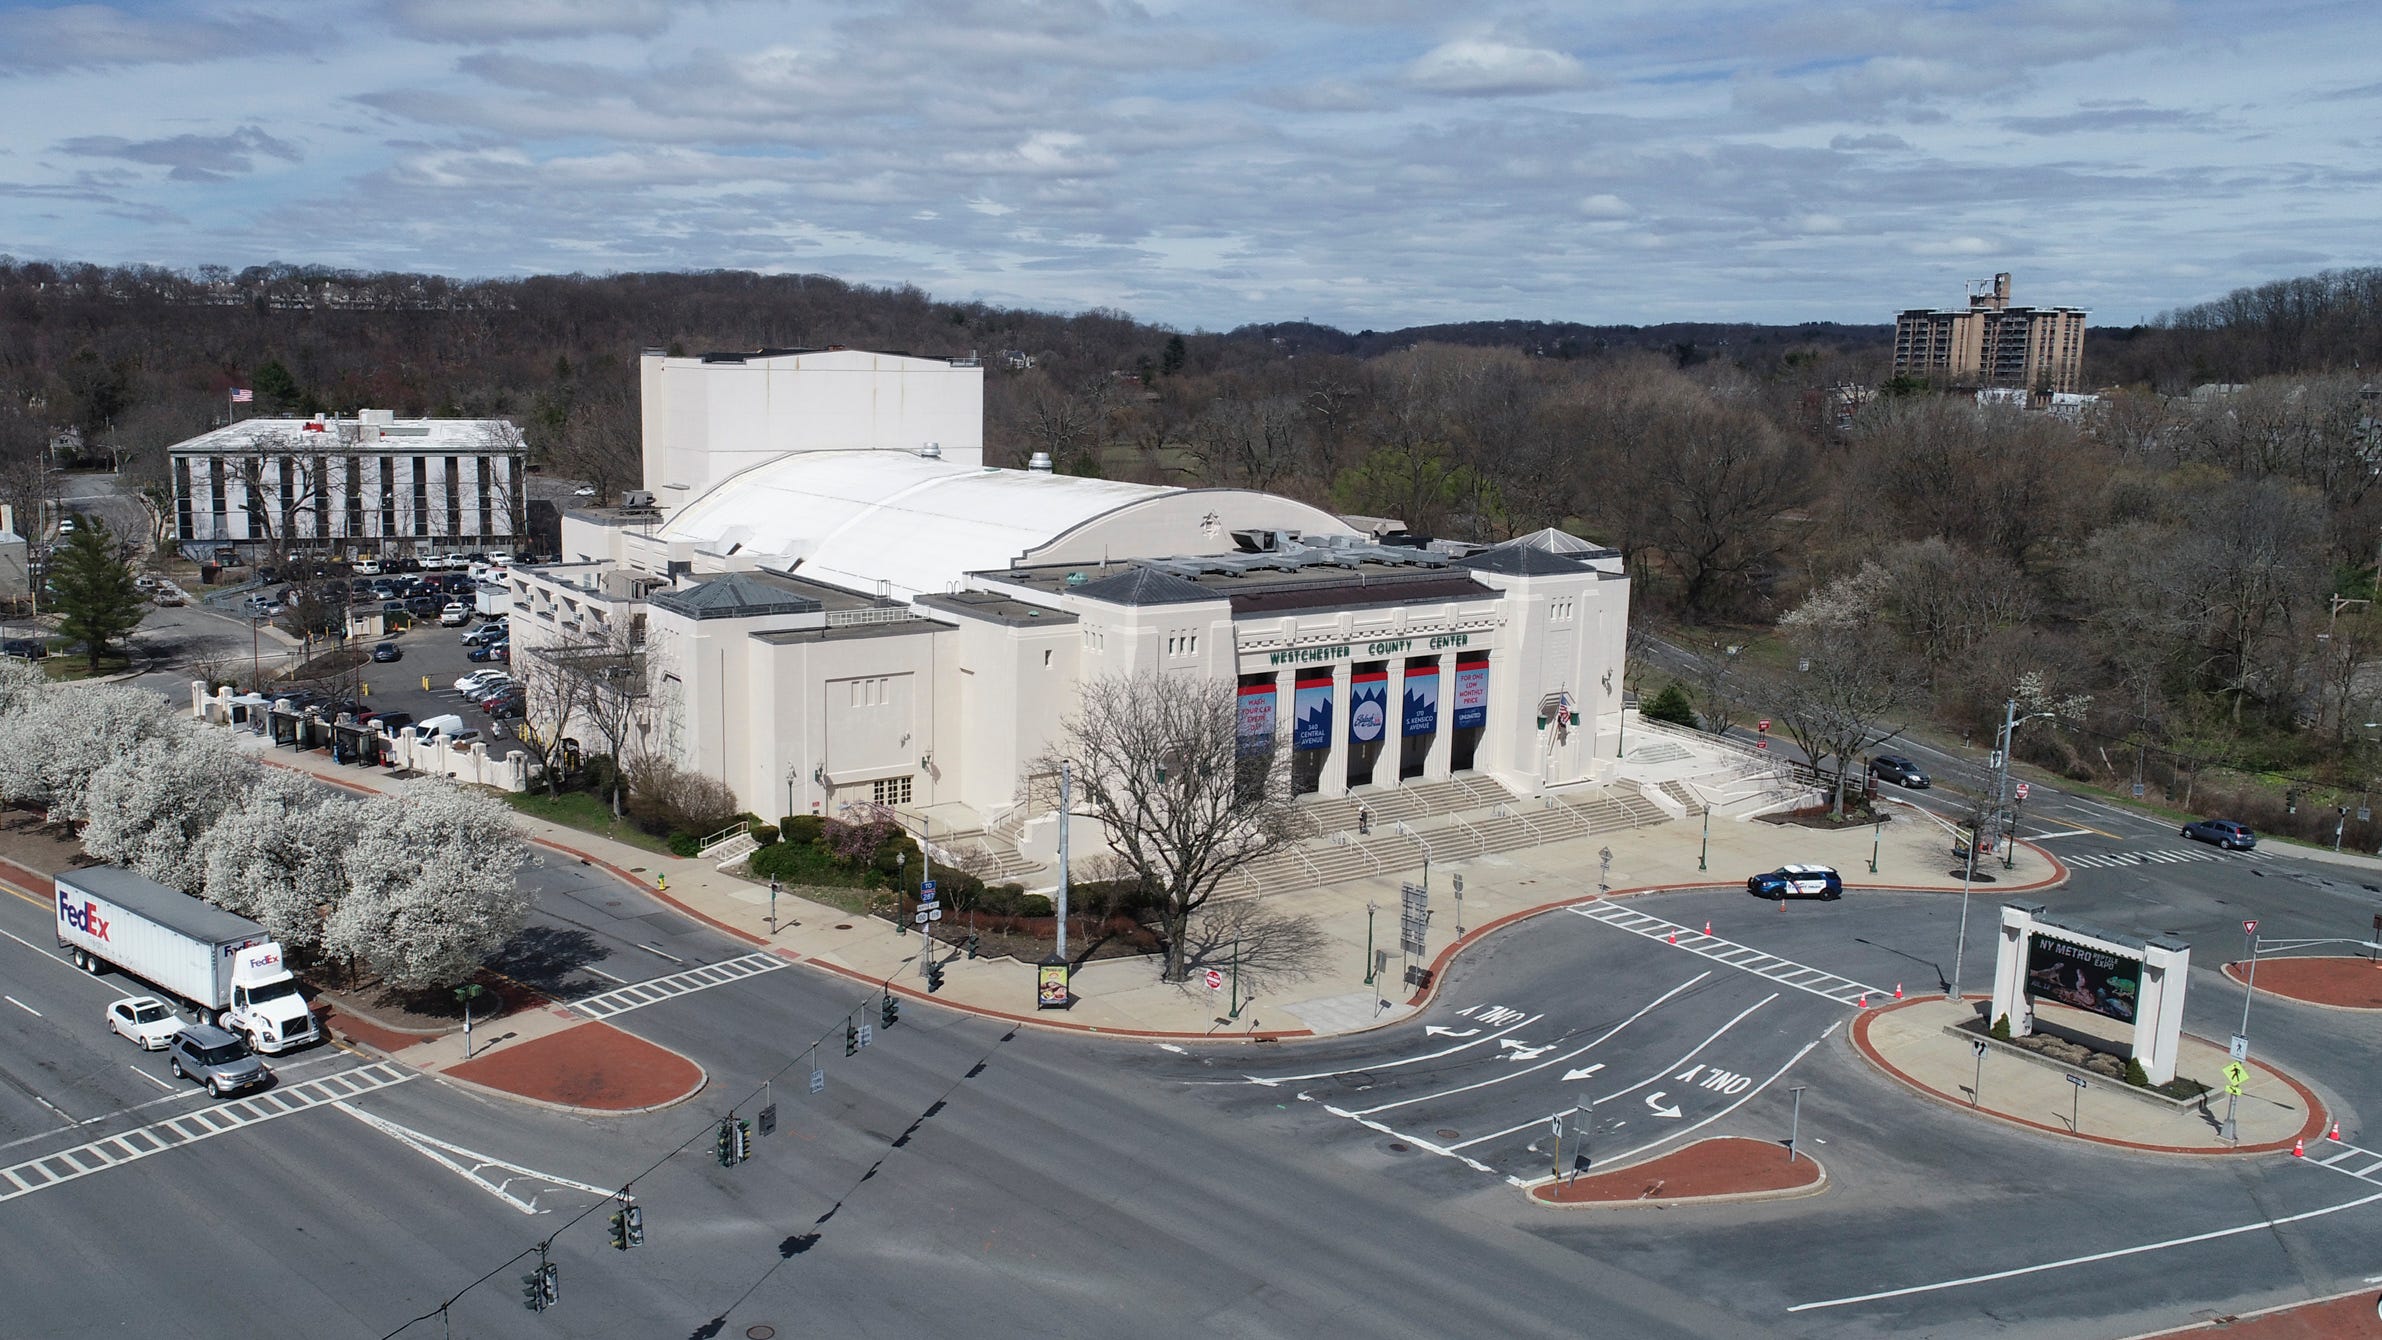 Westchester County Center COVID19 hospital cost 15M. Is it needed?